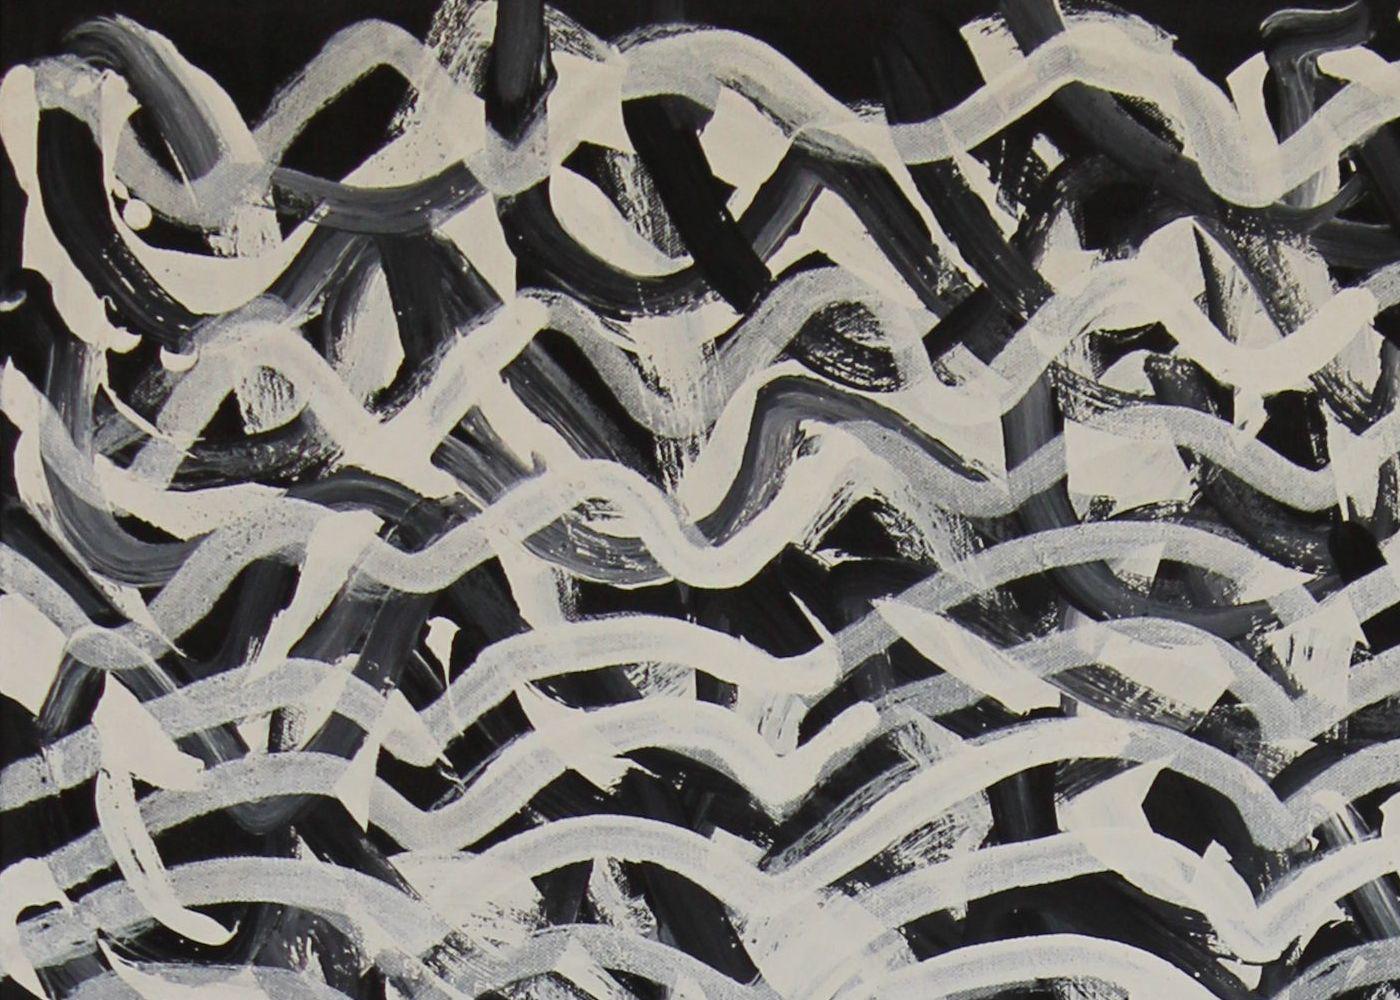 Milkwater. Black and white abstract Aboriginal painting about water. Ocher. - Abstract Expressionist Painting by Kittey Malarvie